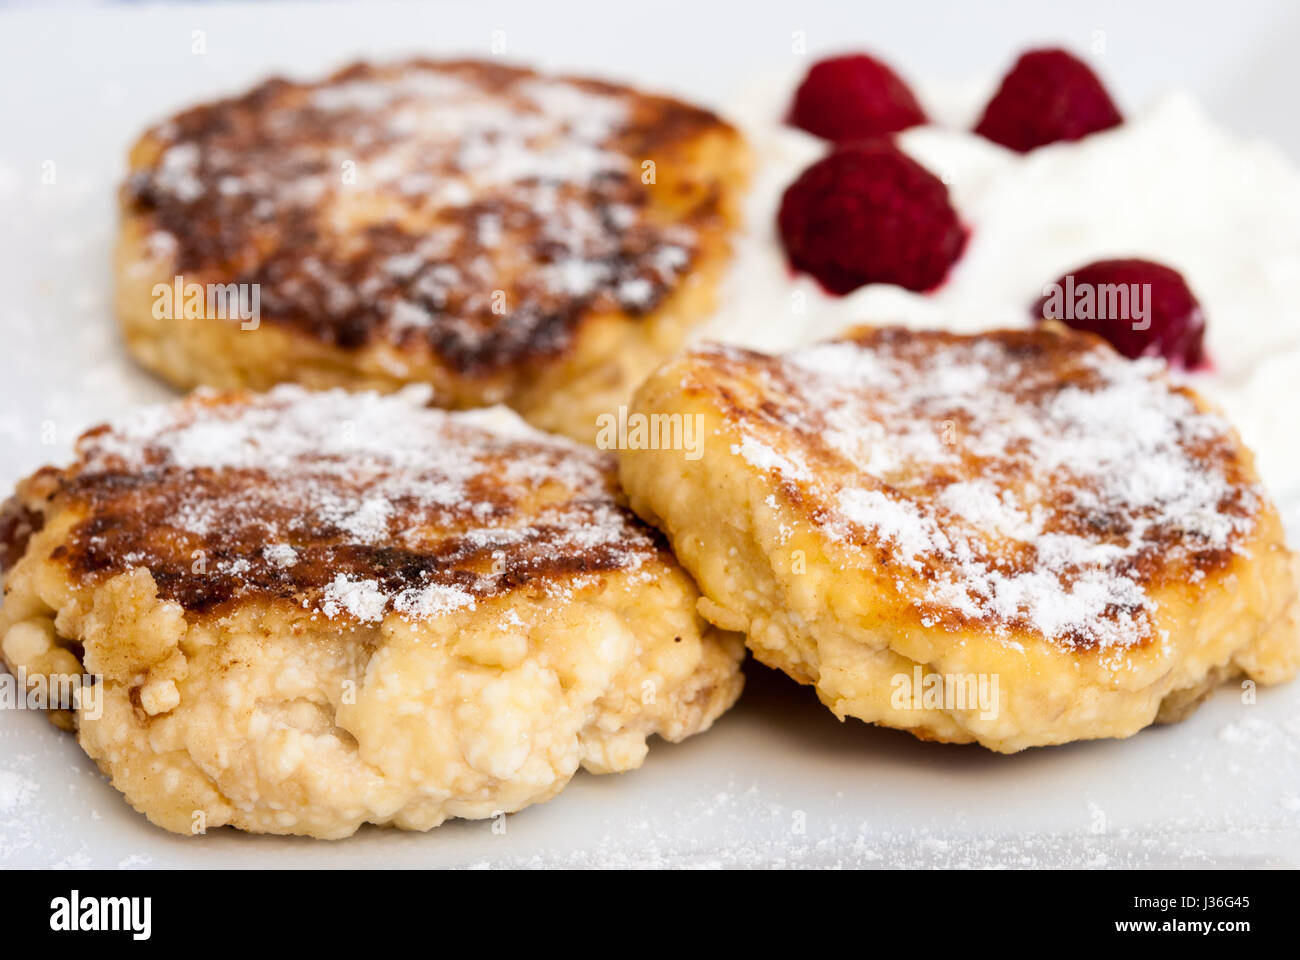 Syrniki (Russian and Ukrainian pancakes) served with sour cream and raspberries Stock Photo